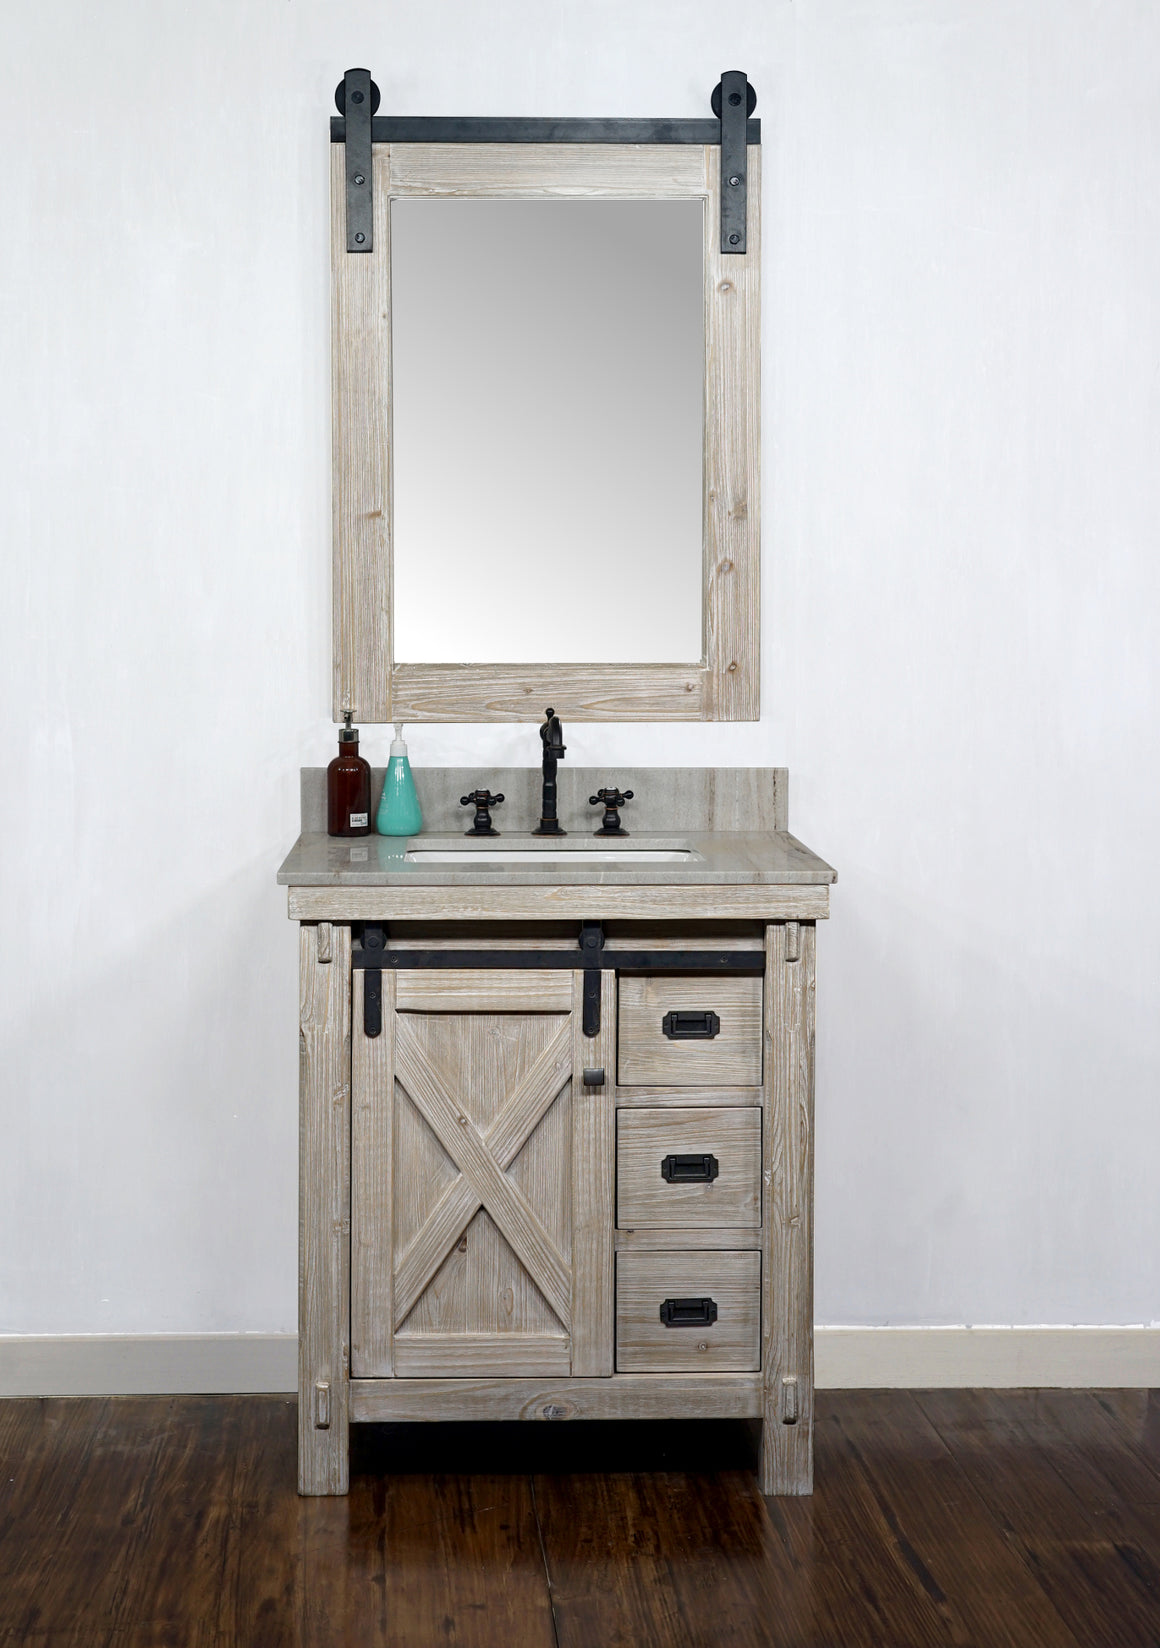 30"RUSTIC SOLID FIR BARN DOOR STYLE SINGLE SINK VANITY WITH COASTAL SANDS MARBLE TOP WITH RECTANGULAR SINK-NO FAUCET